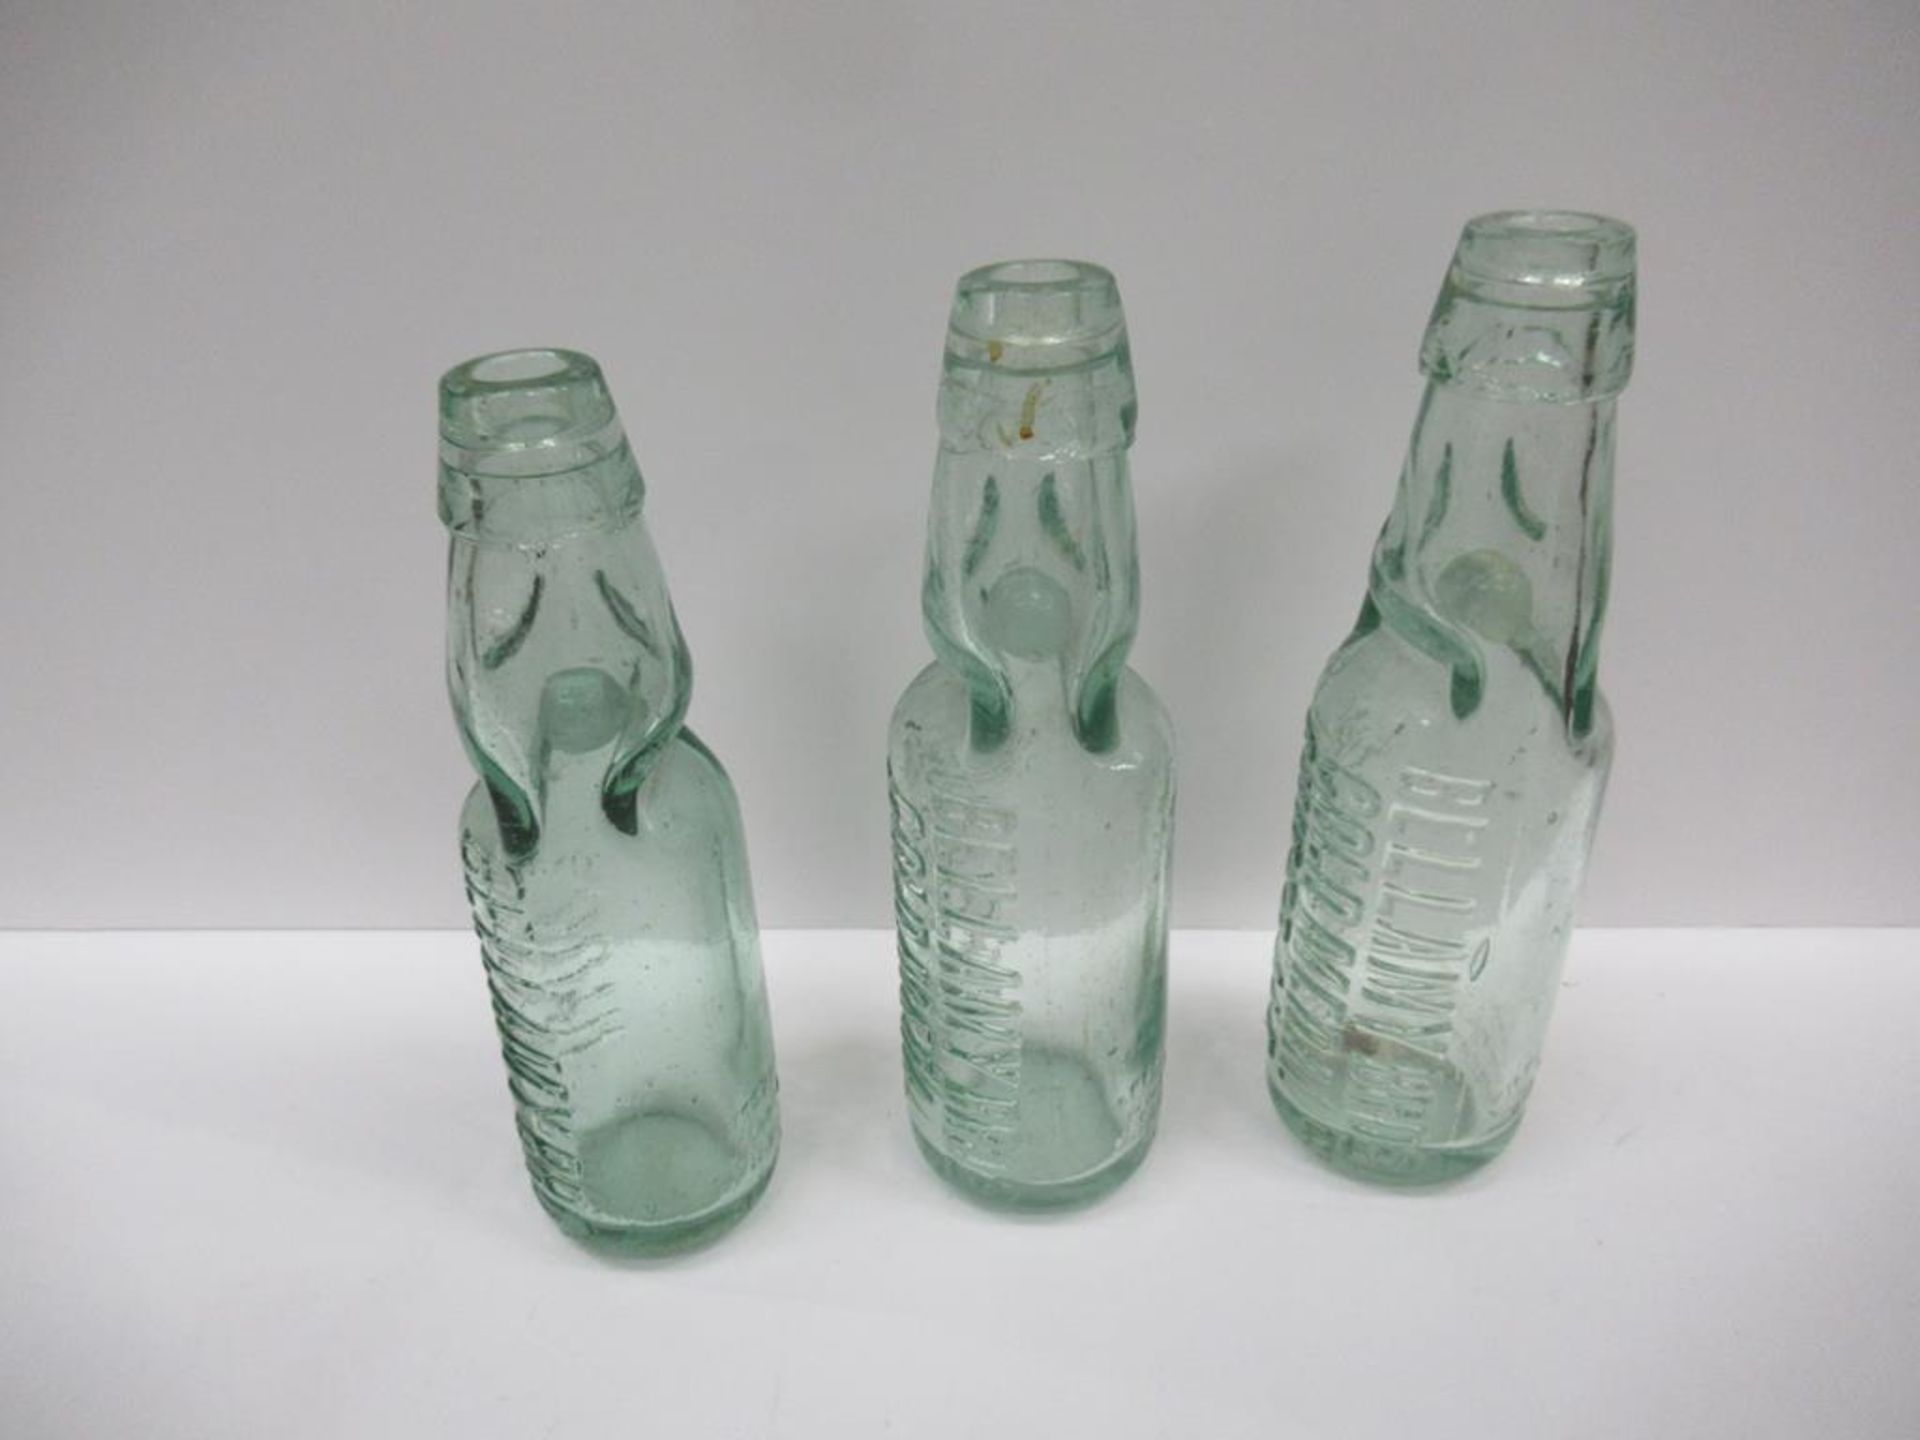 7x Grimsby (3x Grimsby & Louth) Bellamy Bro's Codd bottles - Image 17 of 23